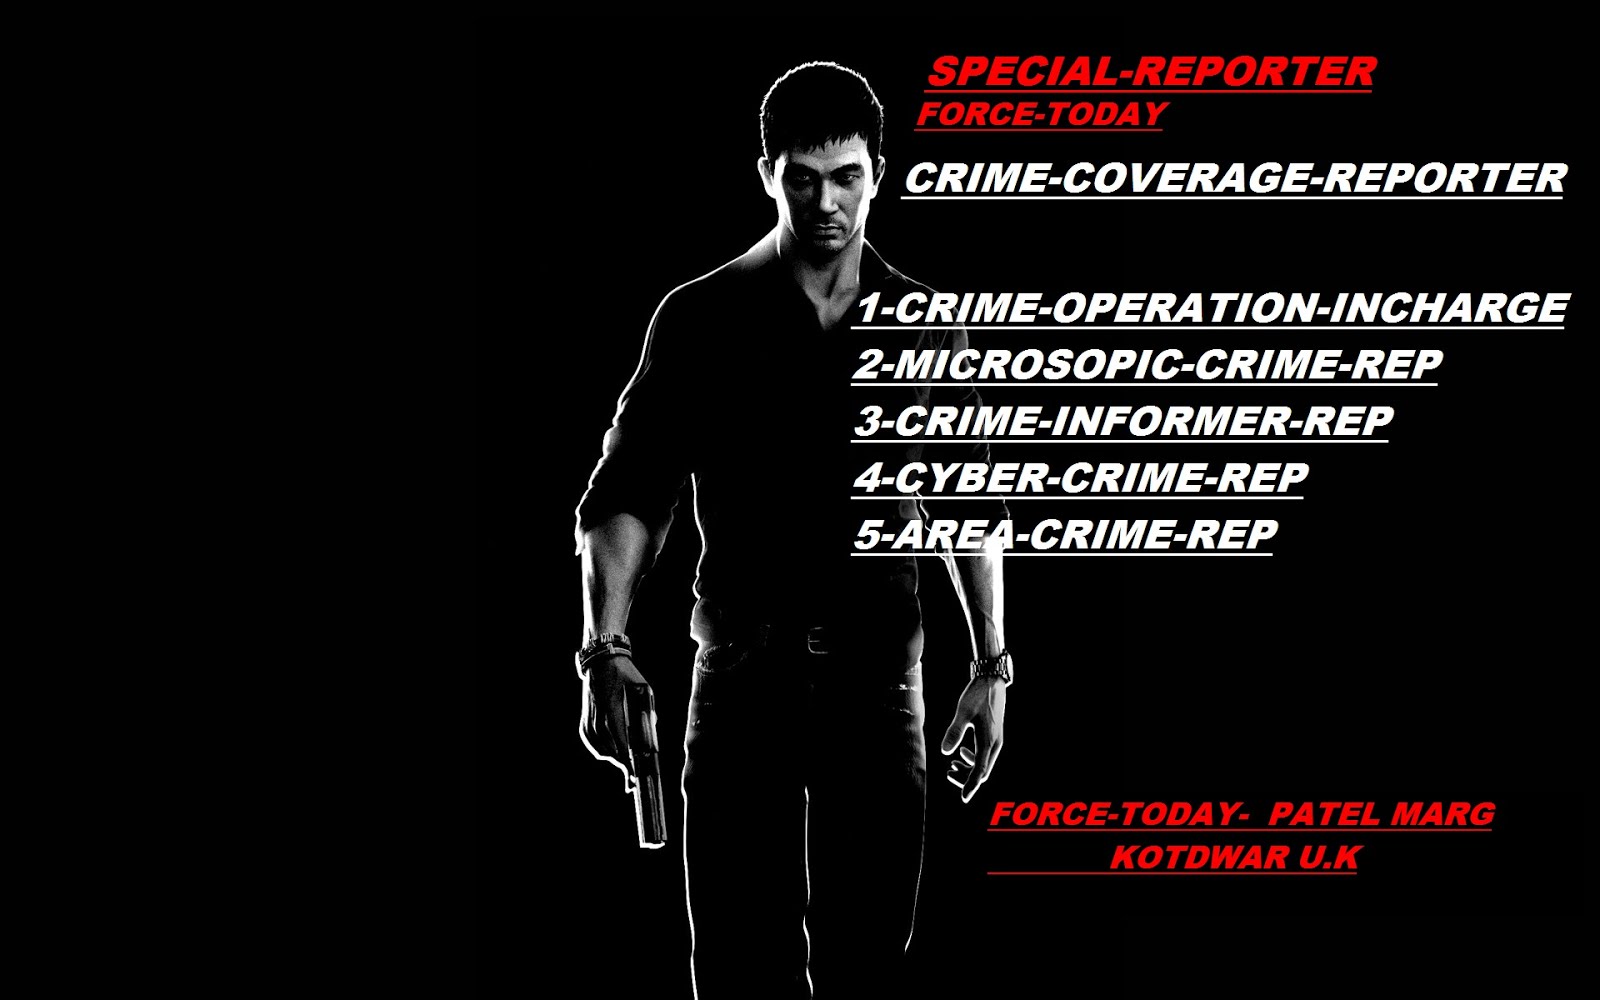 FORCE-TODAY CRIME REPORT